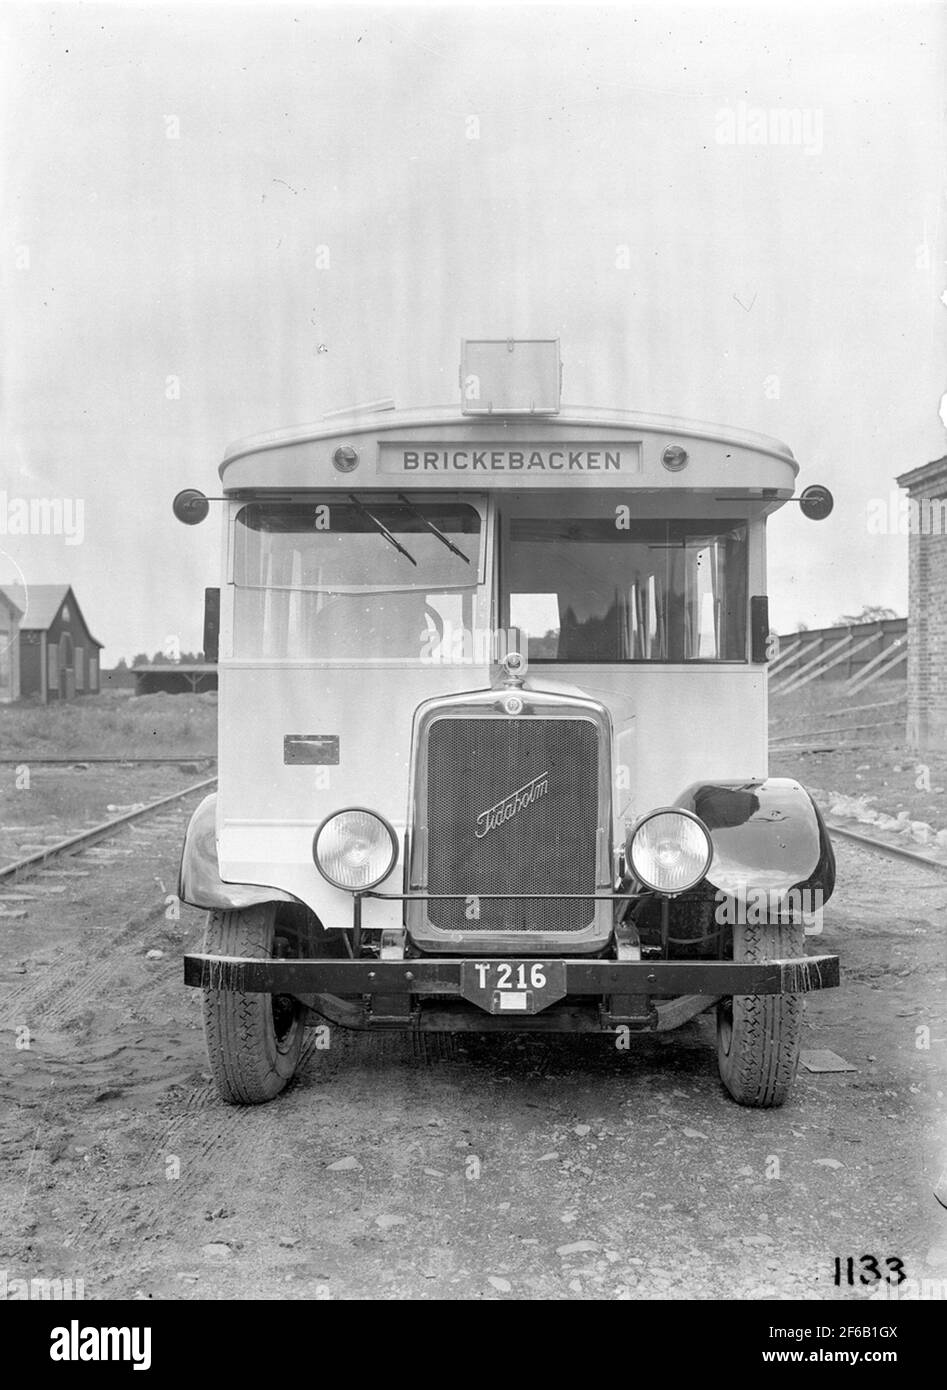 At least two Tidaholm buses to Brickbacken-Mellringe. These buses were delivered to AB Omnibus in Örebro who conducted city traffic in Örebro where said line was included. The company was started in 1922 by Bengt Gilmark and John Tjernvik to run by Gilmark after a few years. In 1938, the company was sold to Knut Oskar Gustavson who retained the company name since he in turn selling city traffic to Örebro city in 1947. On one of the buses on these pictures, there is advertising for the insurance company Ocean. This company was also driven by Gilmark. The images should be placed under Örebro Cou Stock Photo